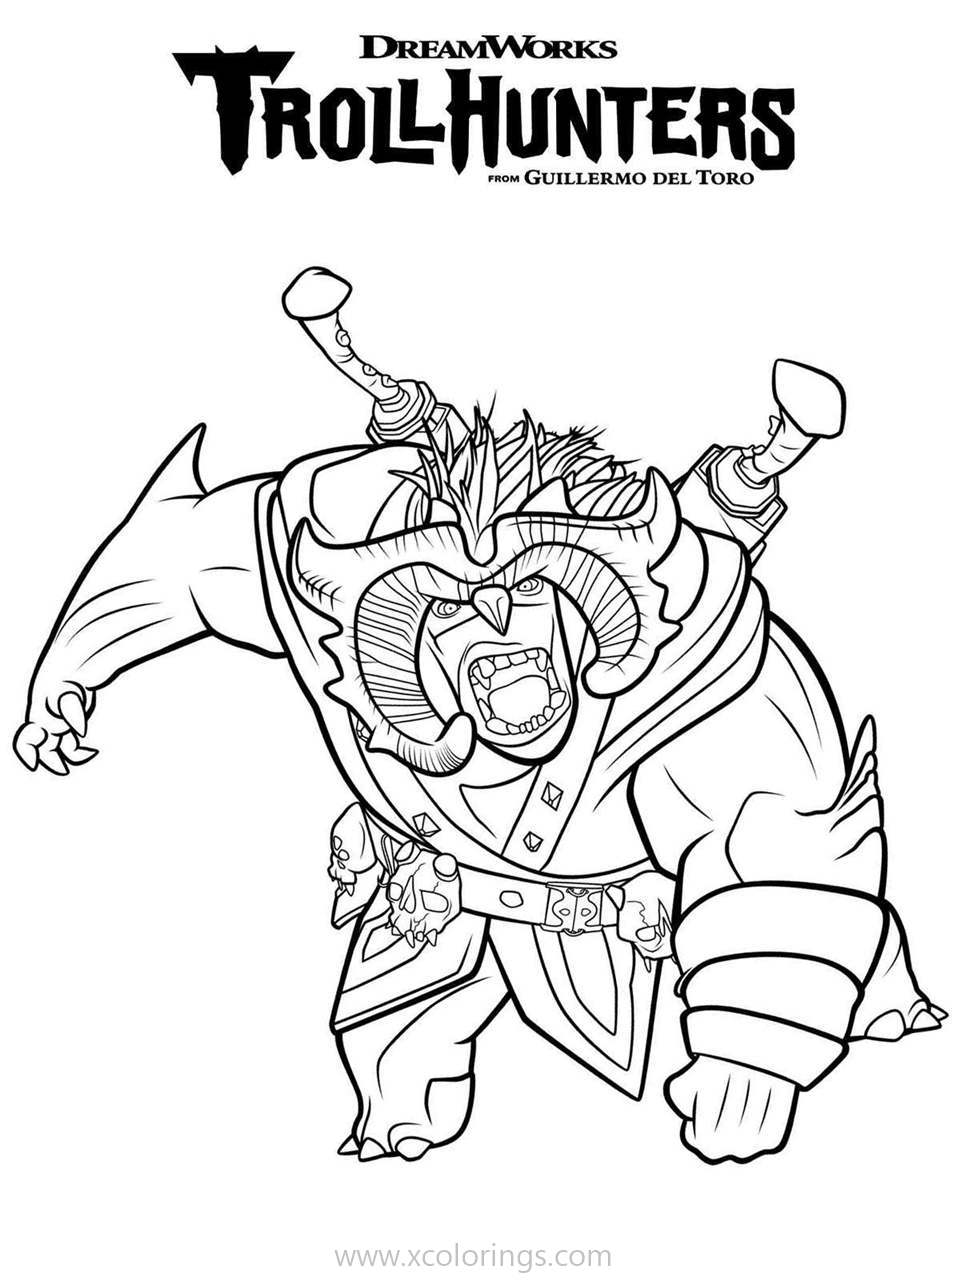 Trollhunters Coloring Pages Bular - XColorings.com